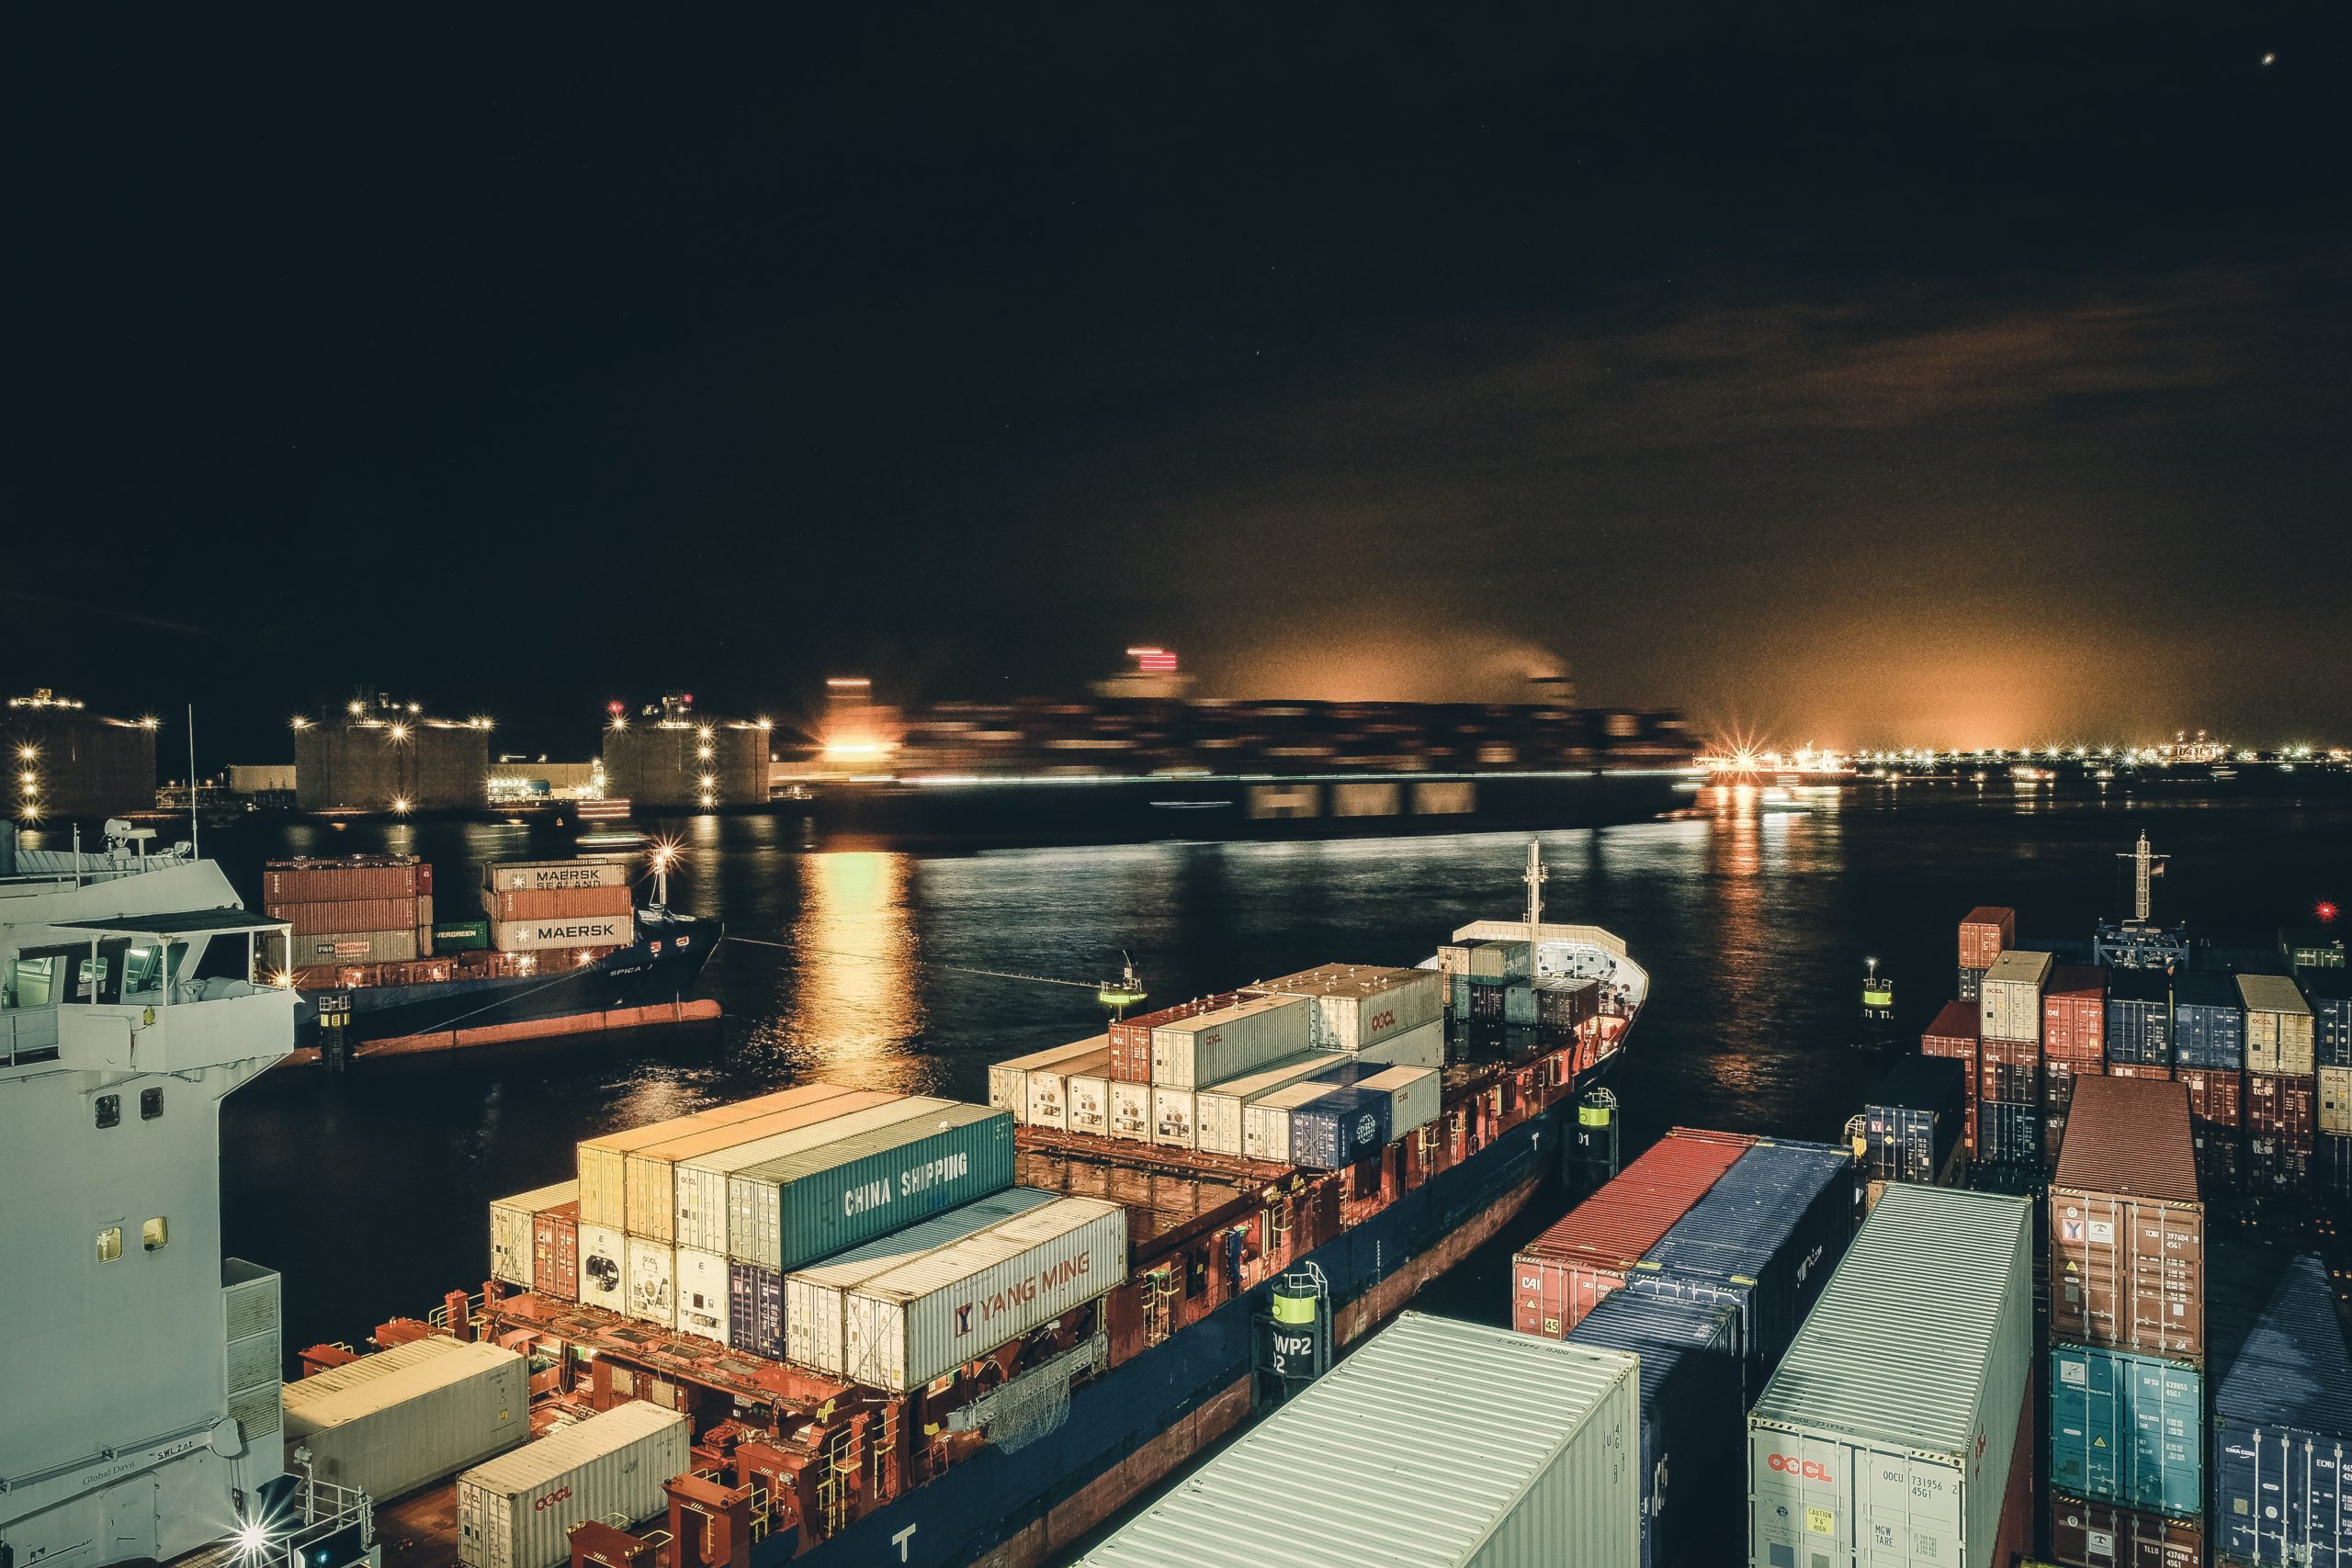 Cargo ships covered in shipping containers sit in the water at night.